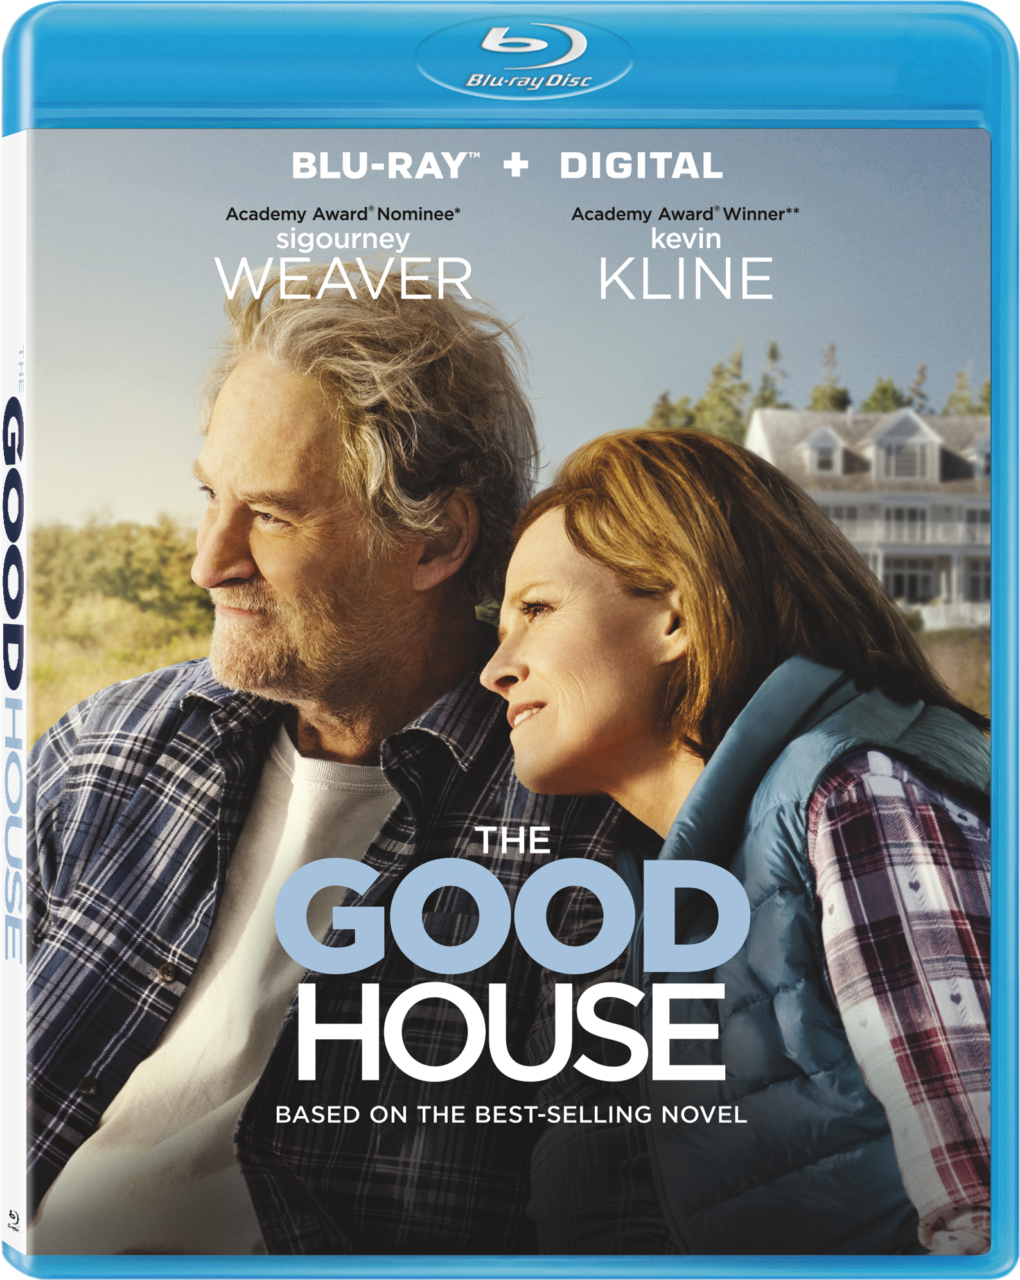 The Good House Blu-Ray Combo Pack cover (Lionsgate)